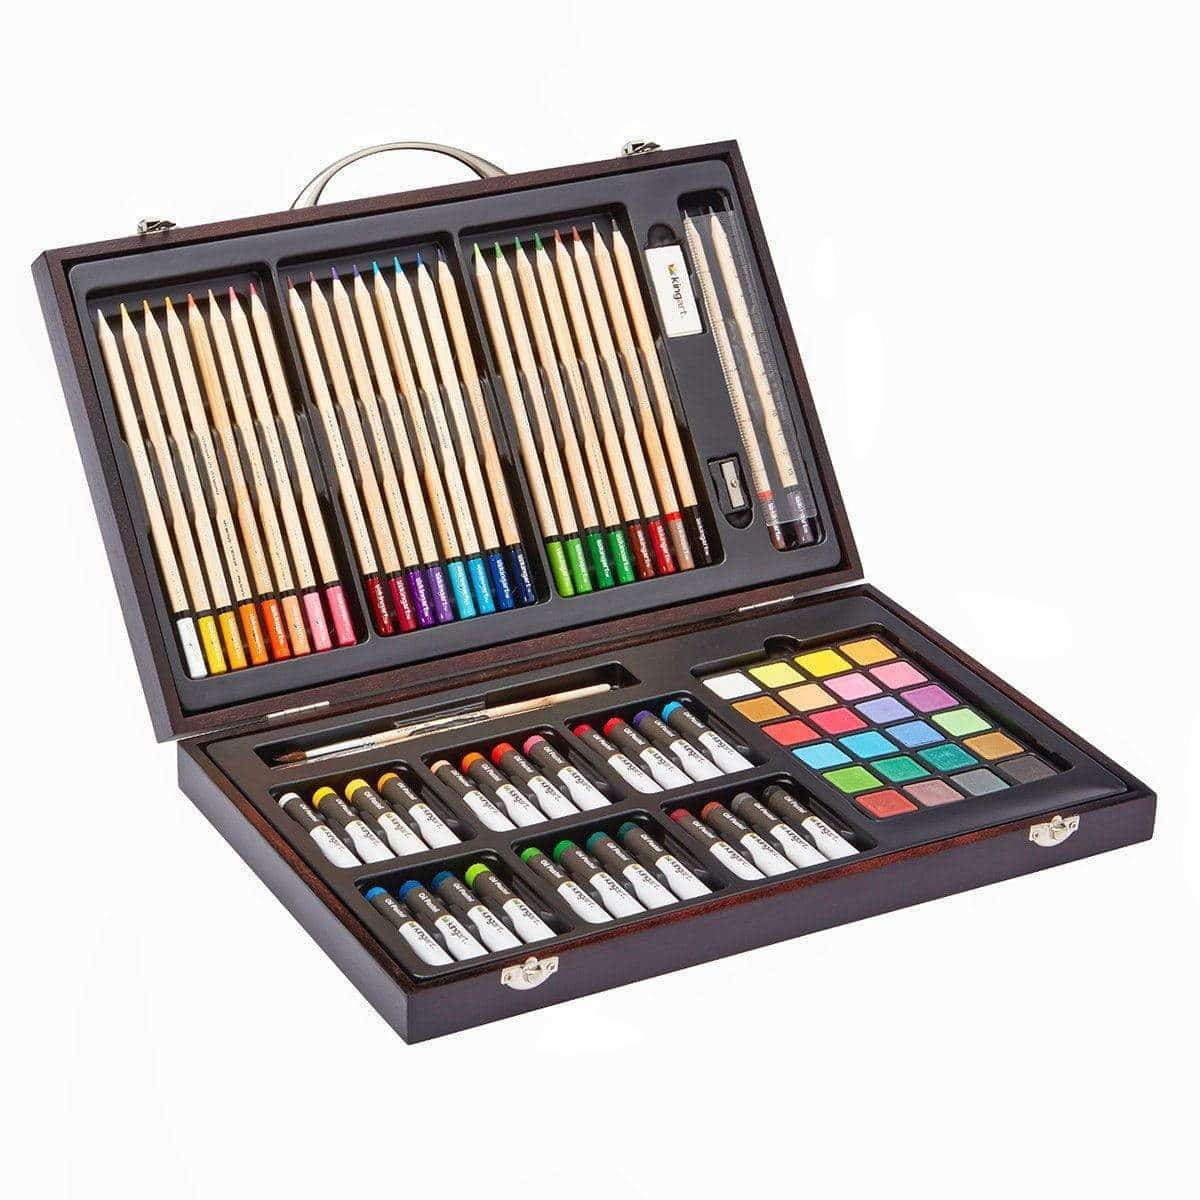 150pc Mixed Media Art Set in Wood Case by Artsmith